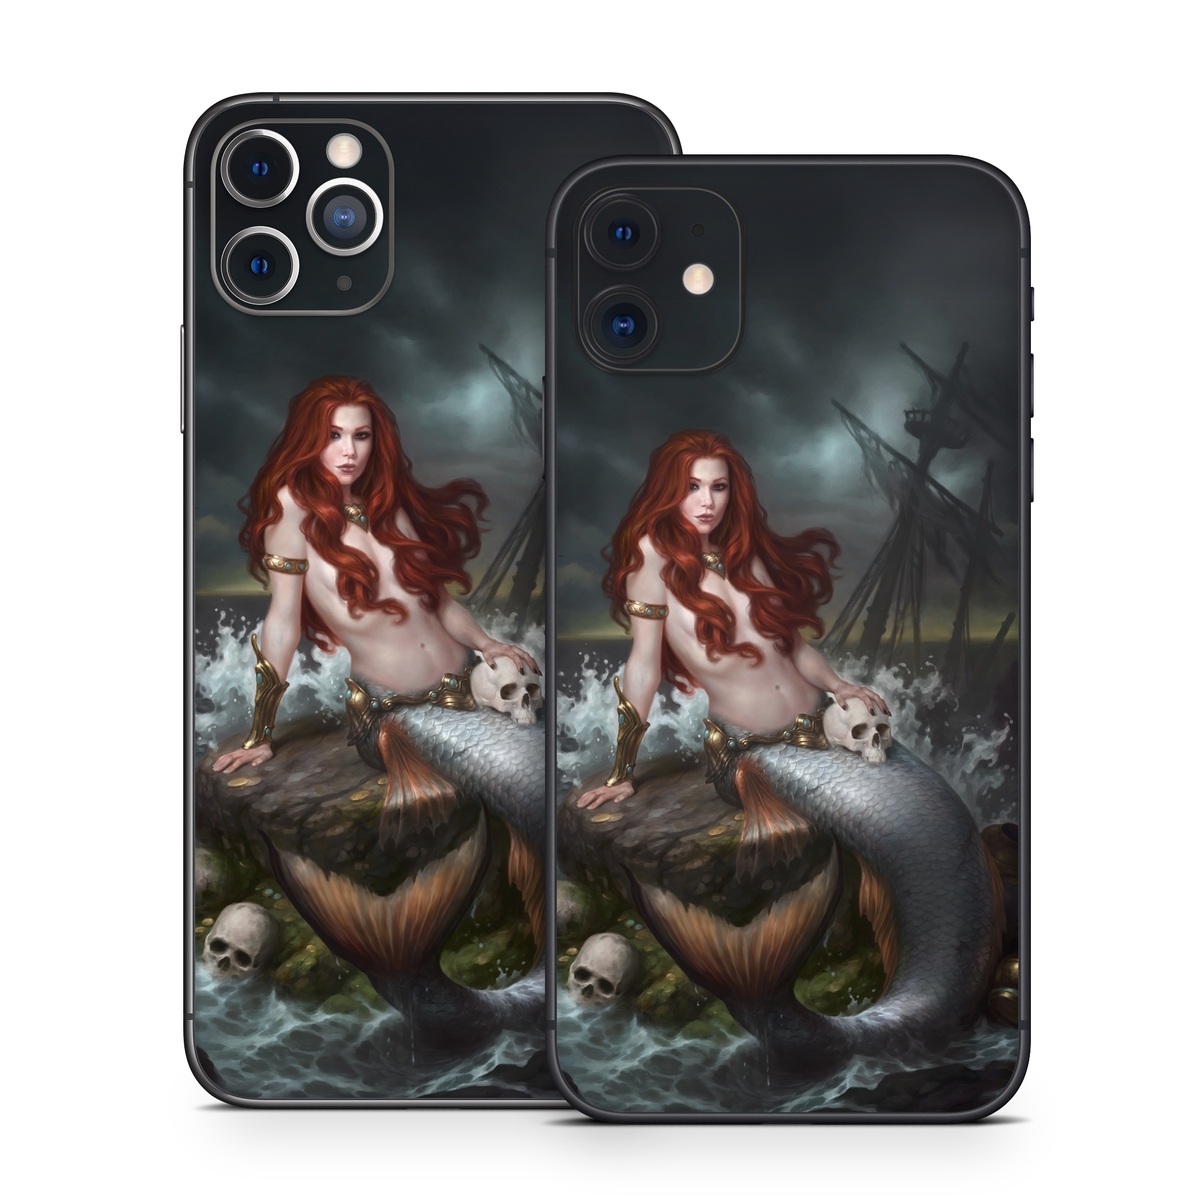 iPhone 11 Series Skin design of Mermaid, Cg artwork, Illustration, Fictional character, Mythology, Mythical creature, Art, Long hair, Woman warrior, Sitting, with black, brown, red, yellow, white, gray colors